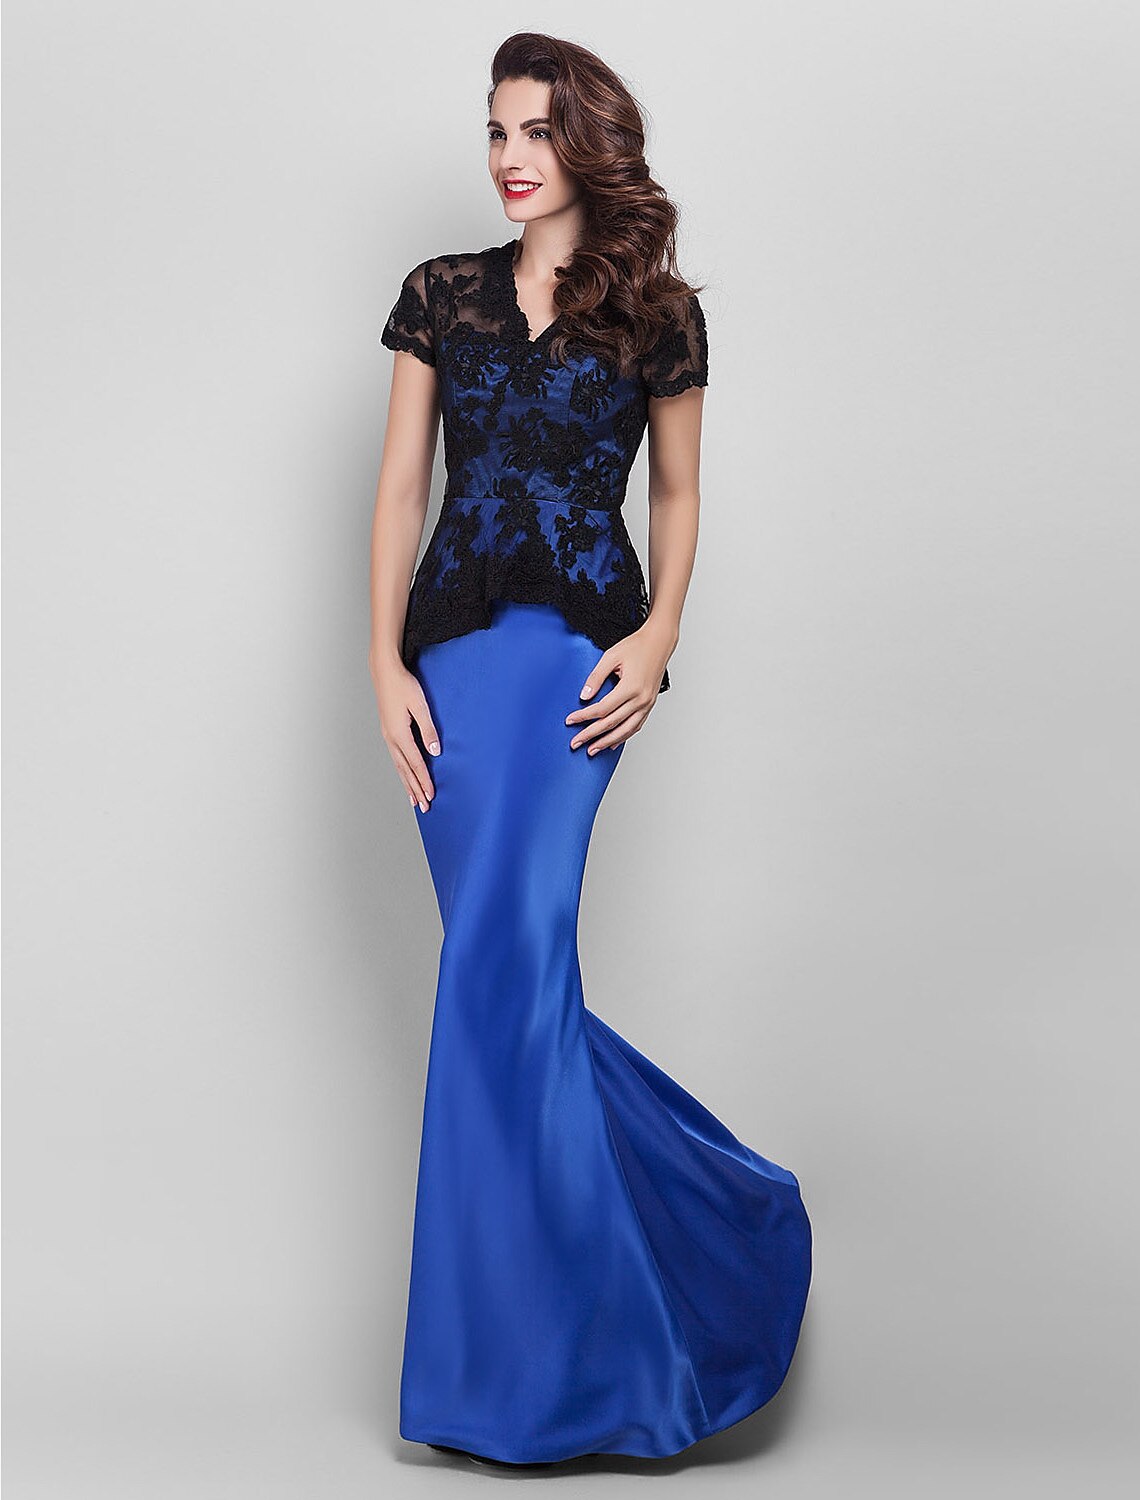 Holiday Cocktail Party Prom Dress V Neck Short Sleeve Floor Length Lace with Lace Appliques